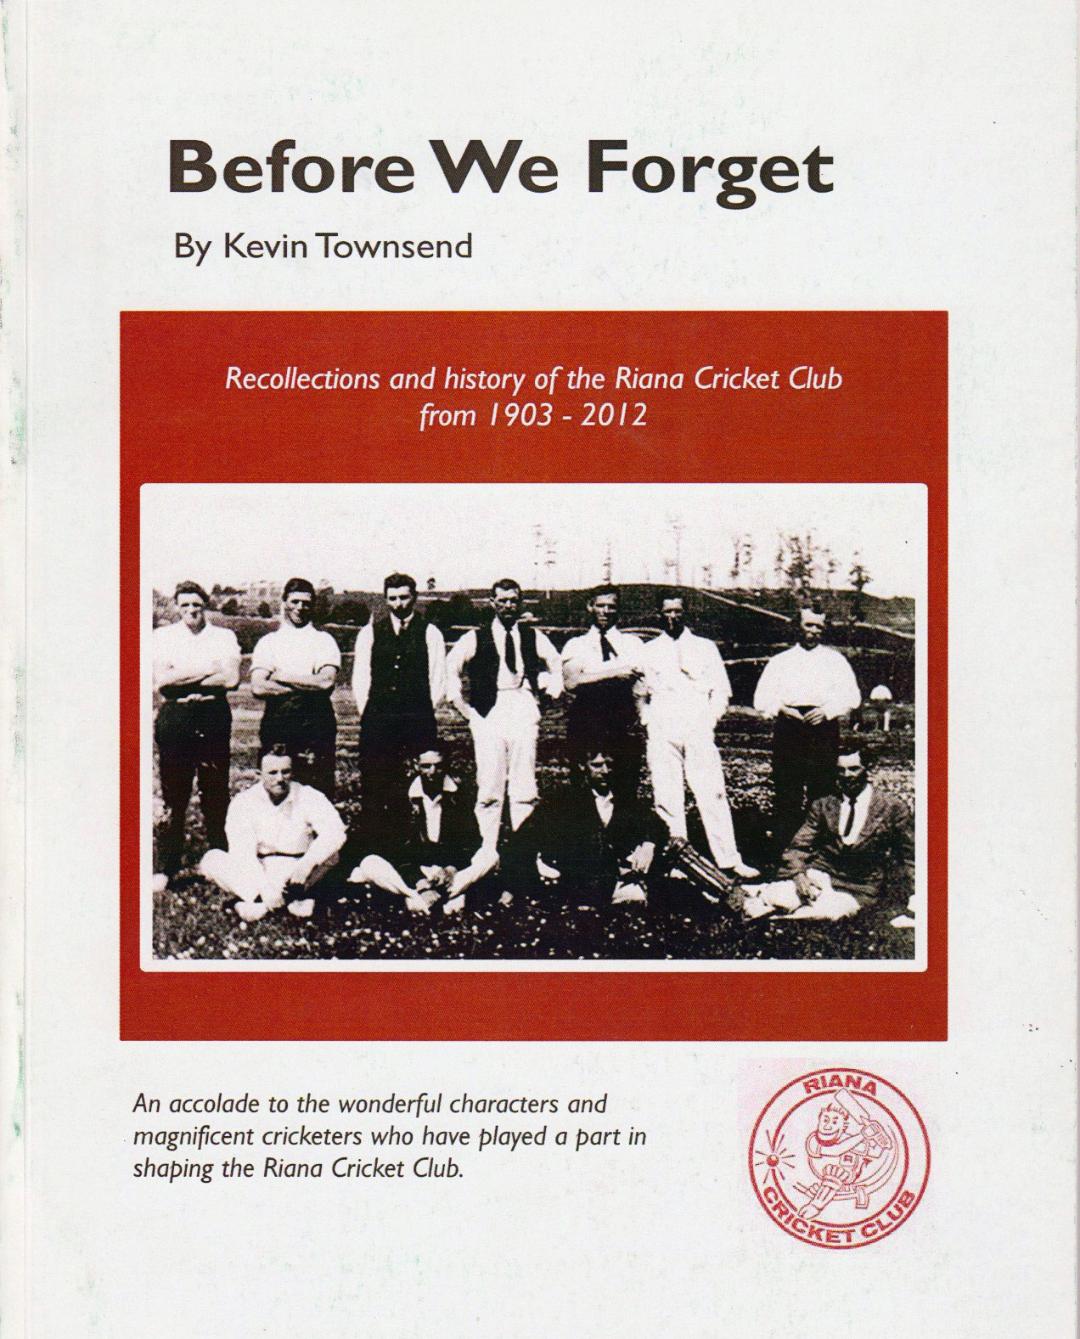 Before We Forget - recollections and history of the Riana Cricket Club from 1903 - 2012